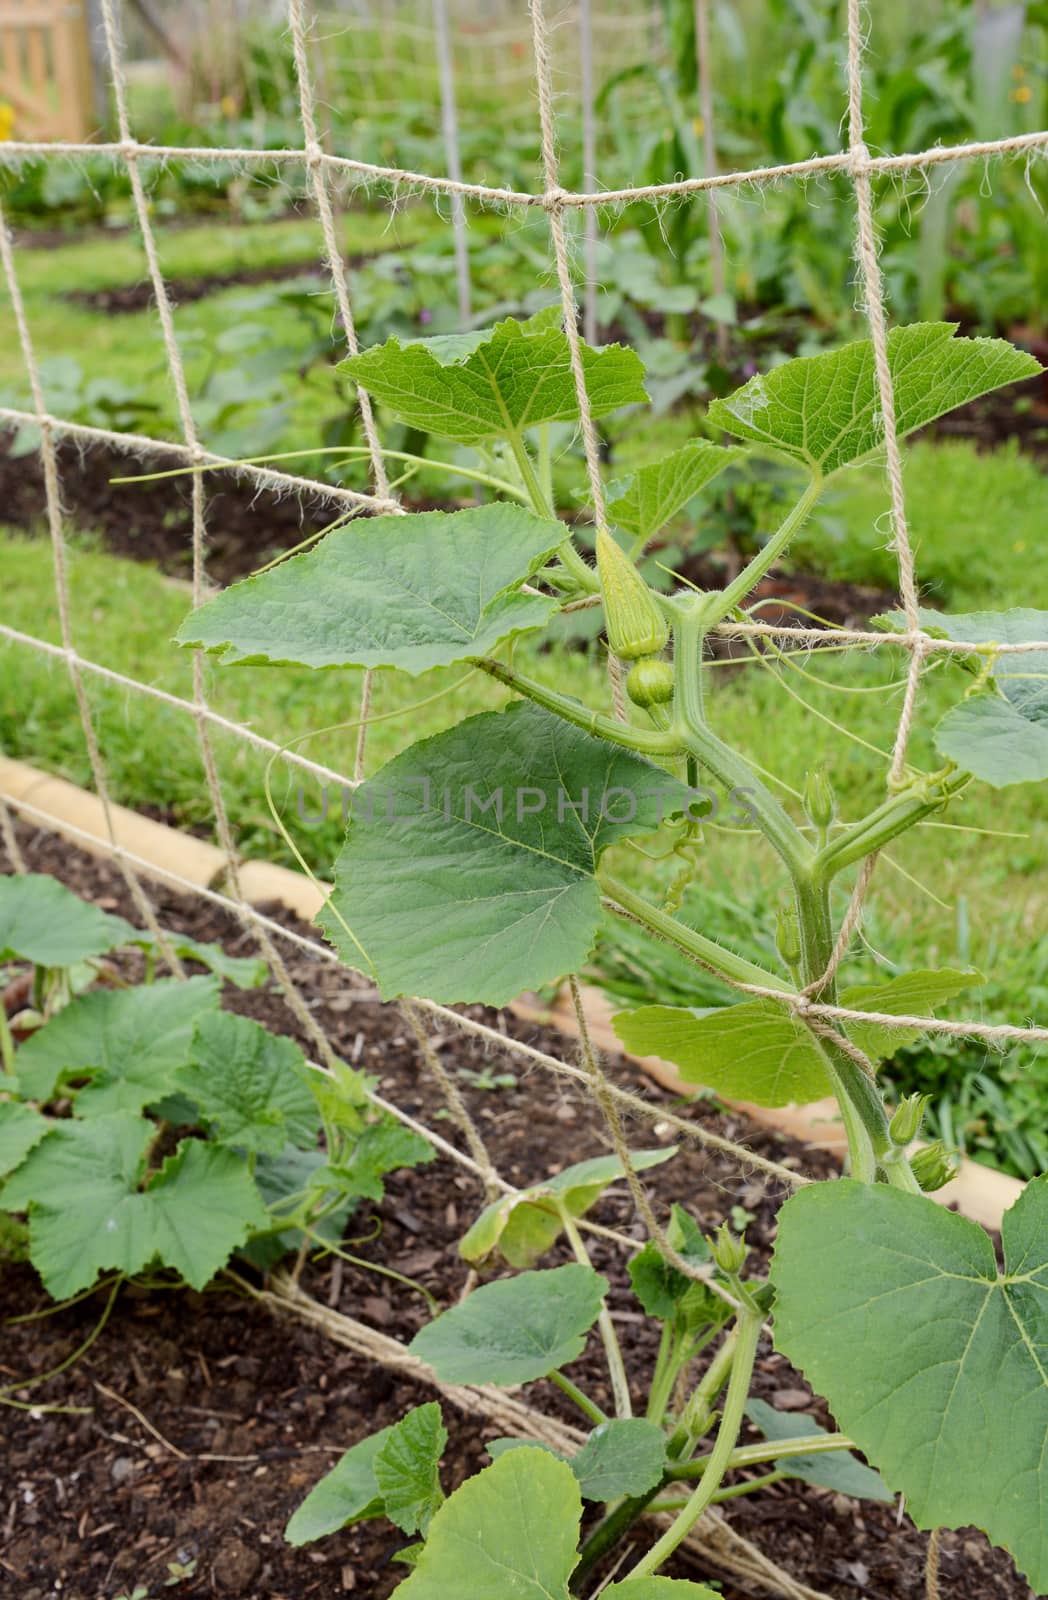 Climbing gourd plant supported on twine netting. A female flower at the top of the plants shows a small fruit beneath the closed petals.